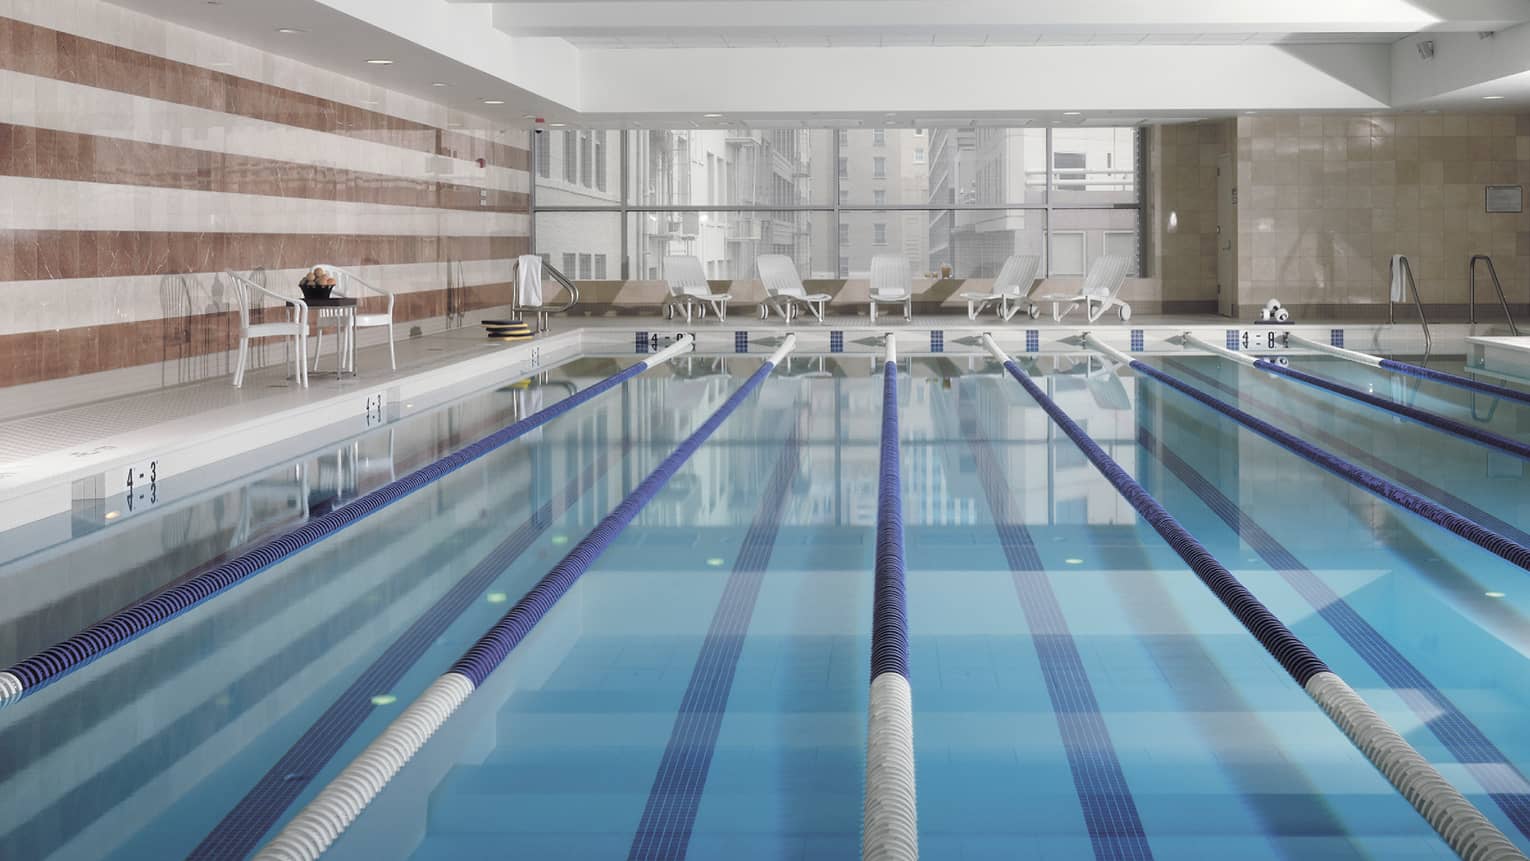 View across indoor swimming pool with divided lanes 